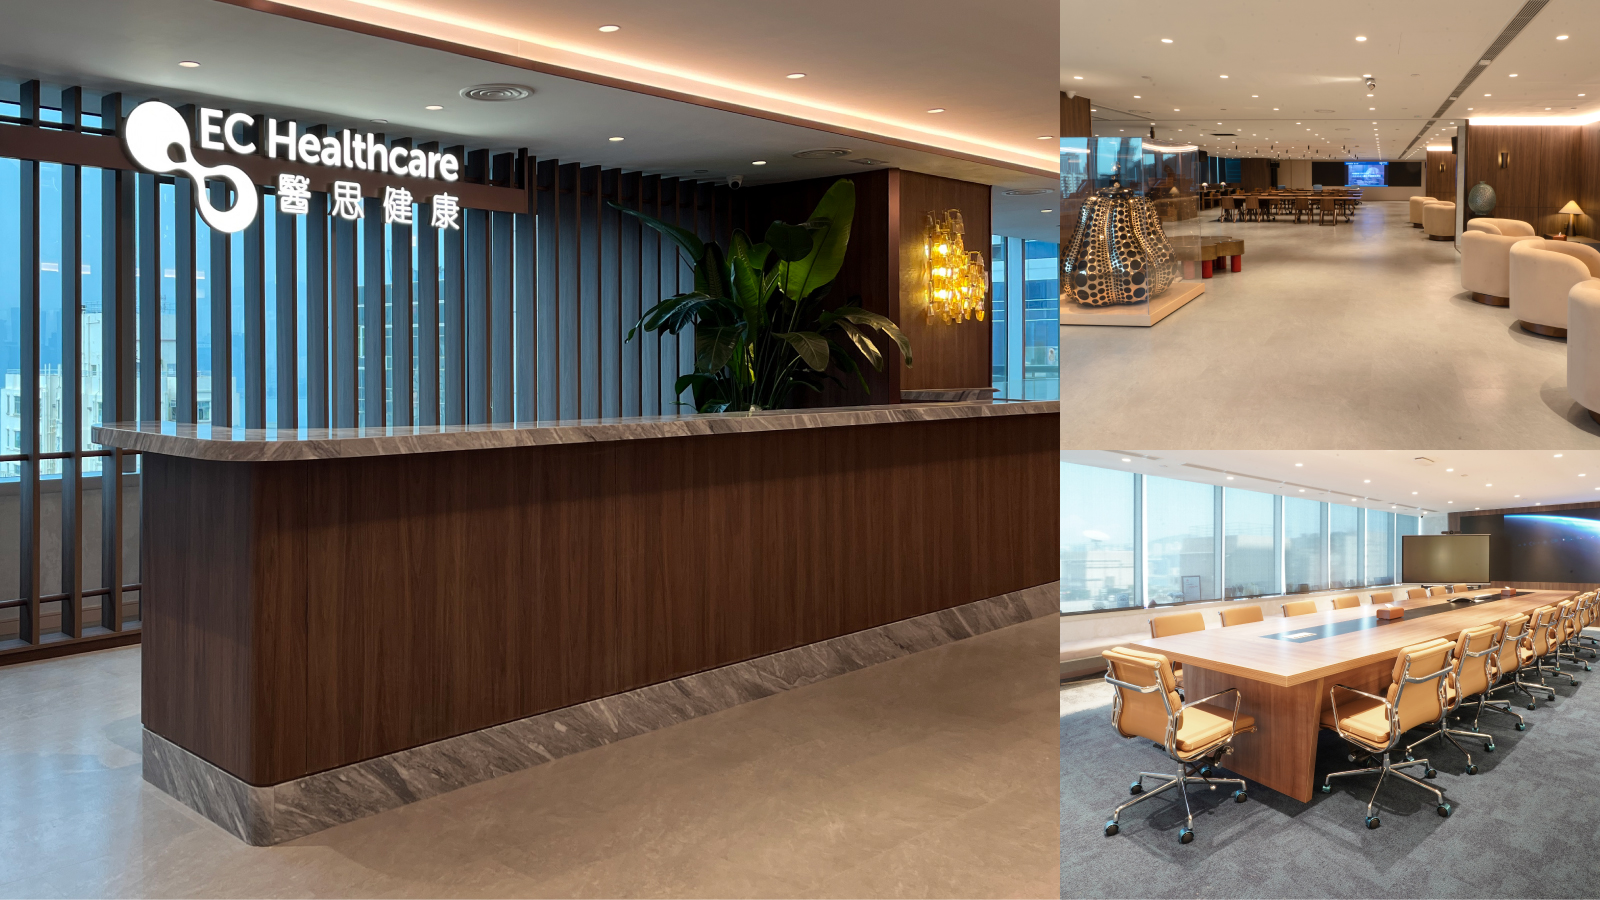 EC Healthcare Corporate Headquarters Moved to Quarry Bay, Hong Kong Island